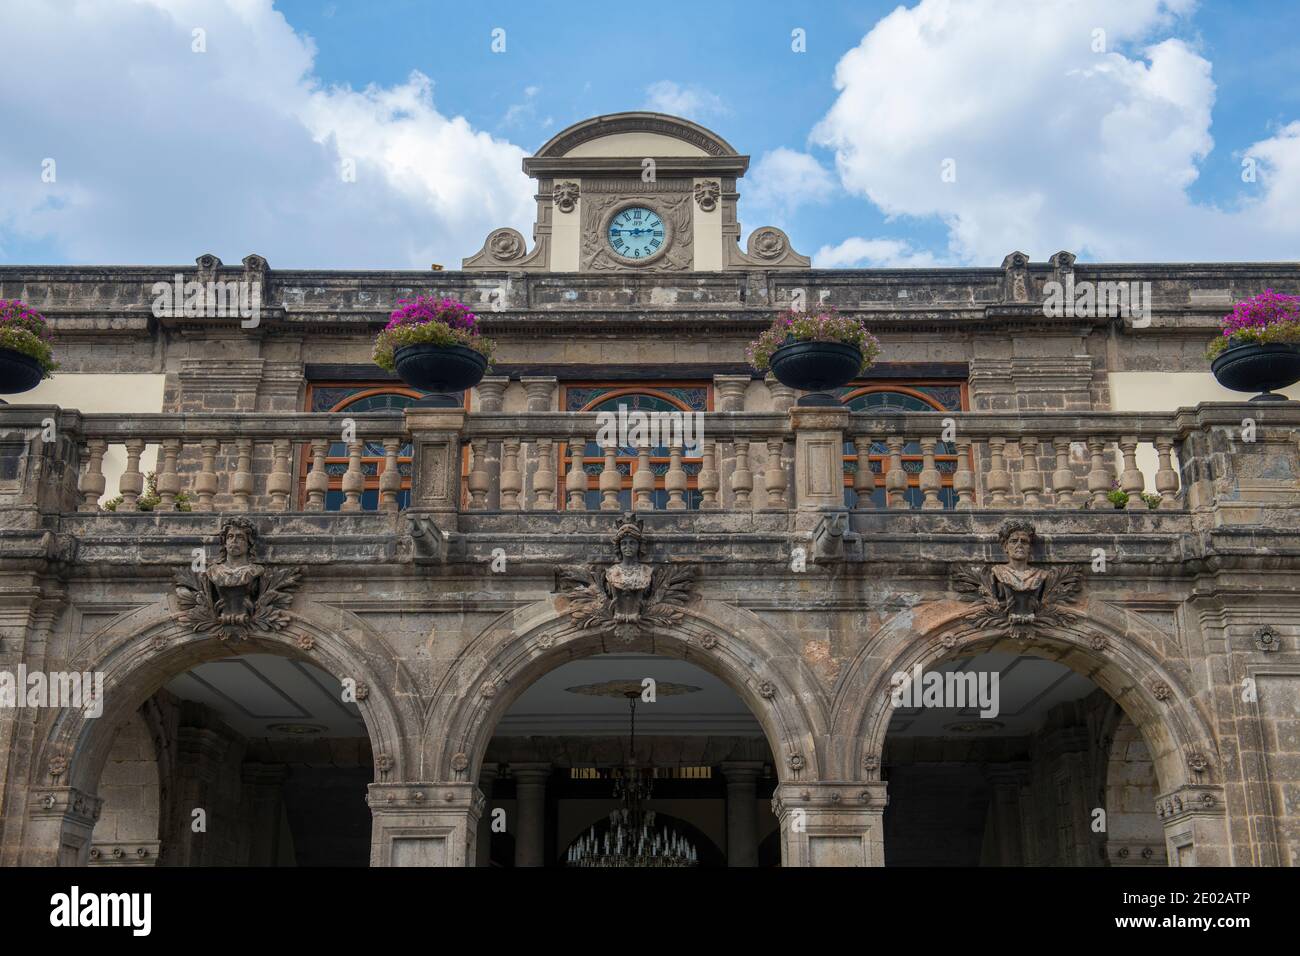 Chapultepec Castle was built in 1864 with Neoclassical style on Chapultepec Hill in Mexico City CDMX, Mexico. The castle was the residence of Emperor Stock Photo